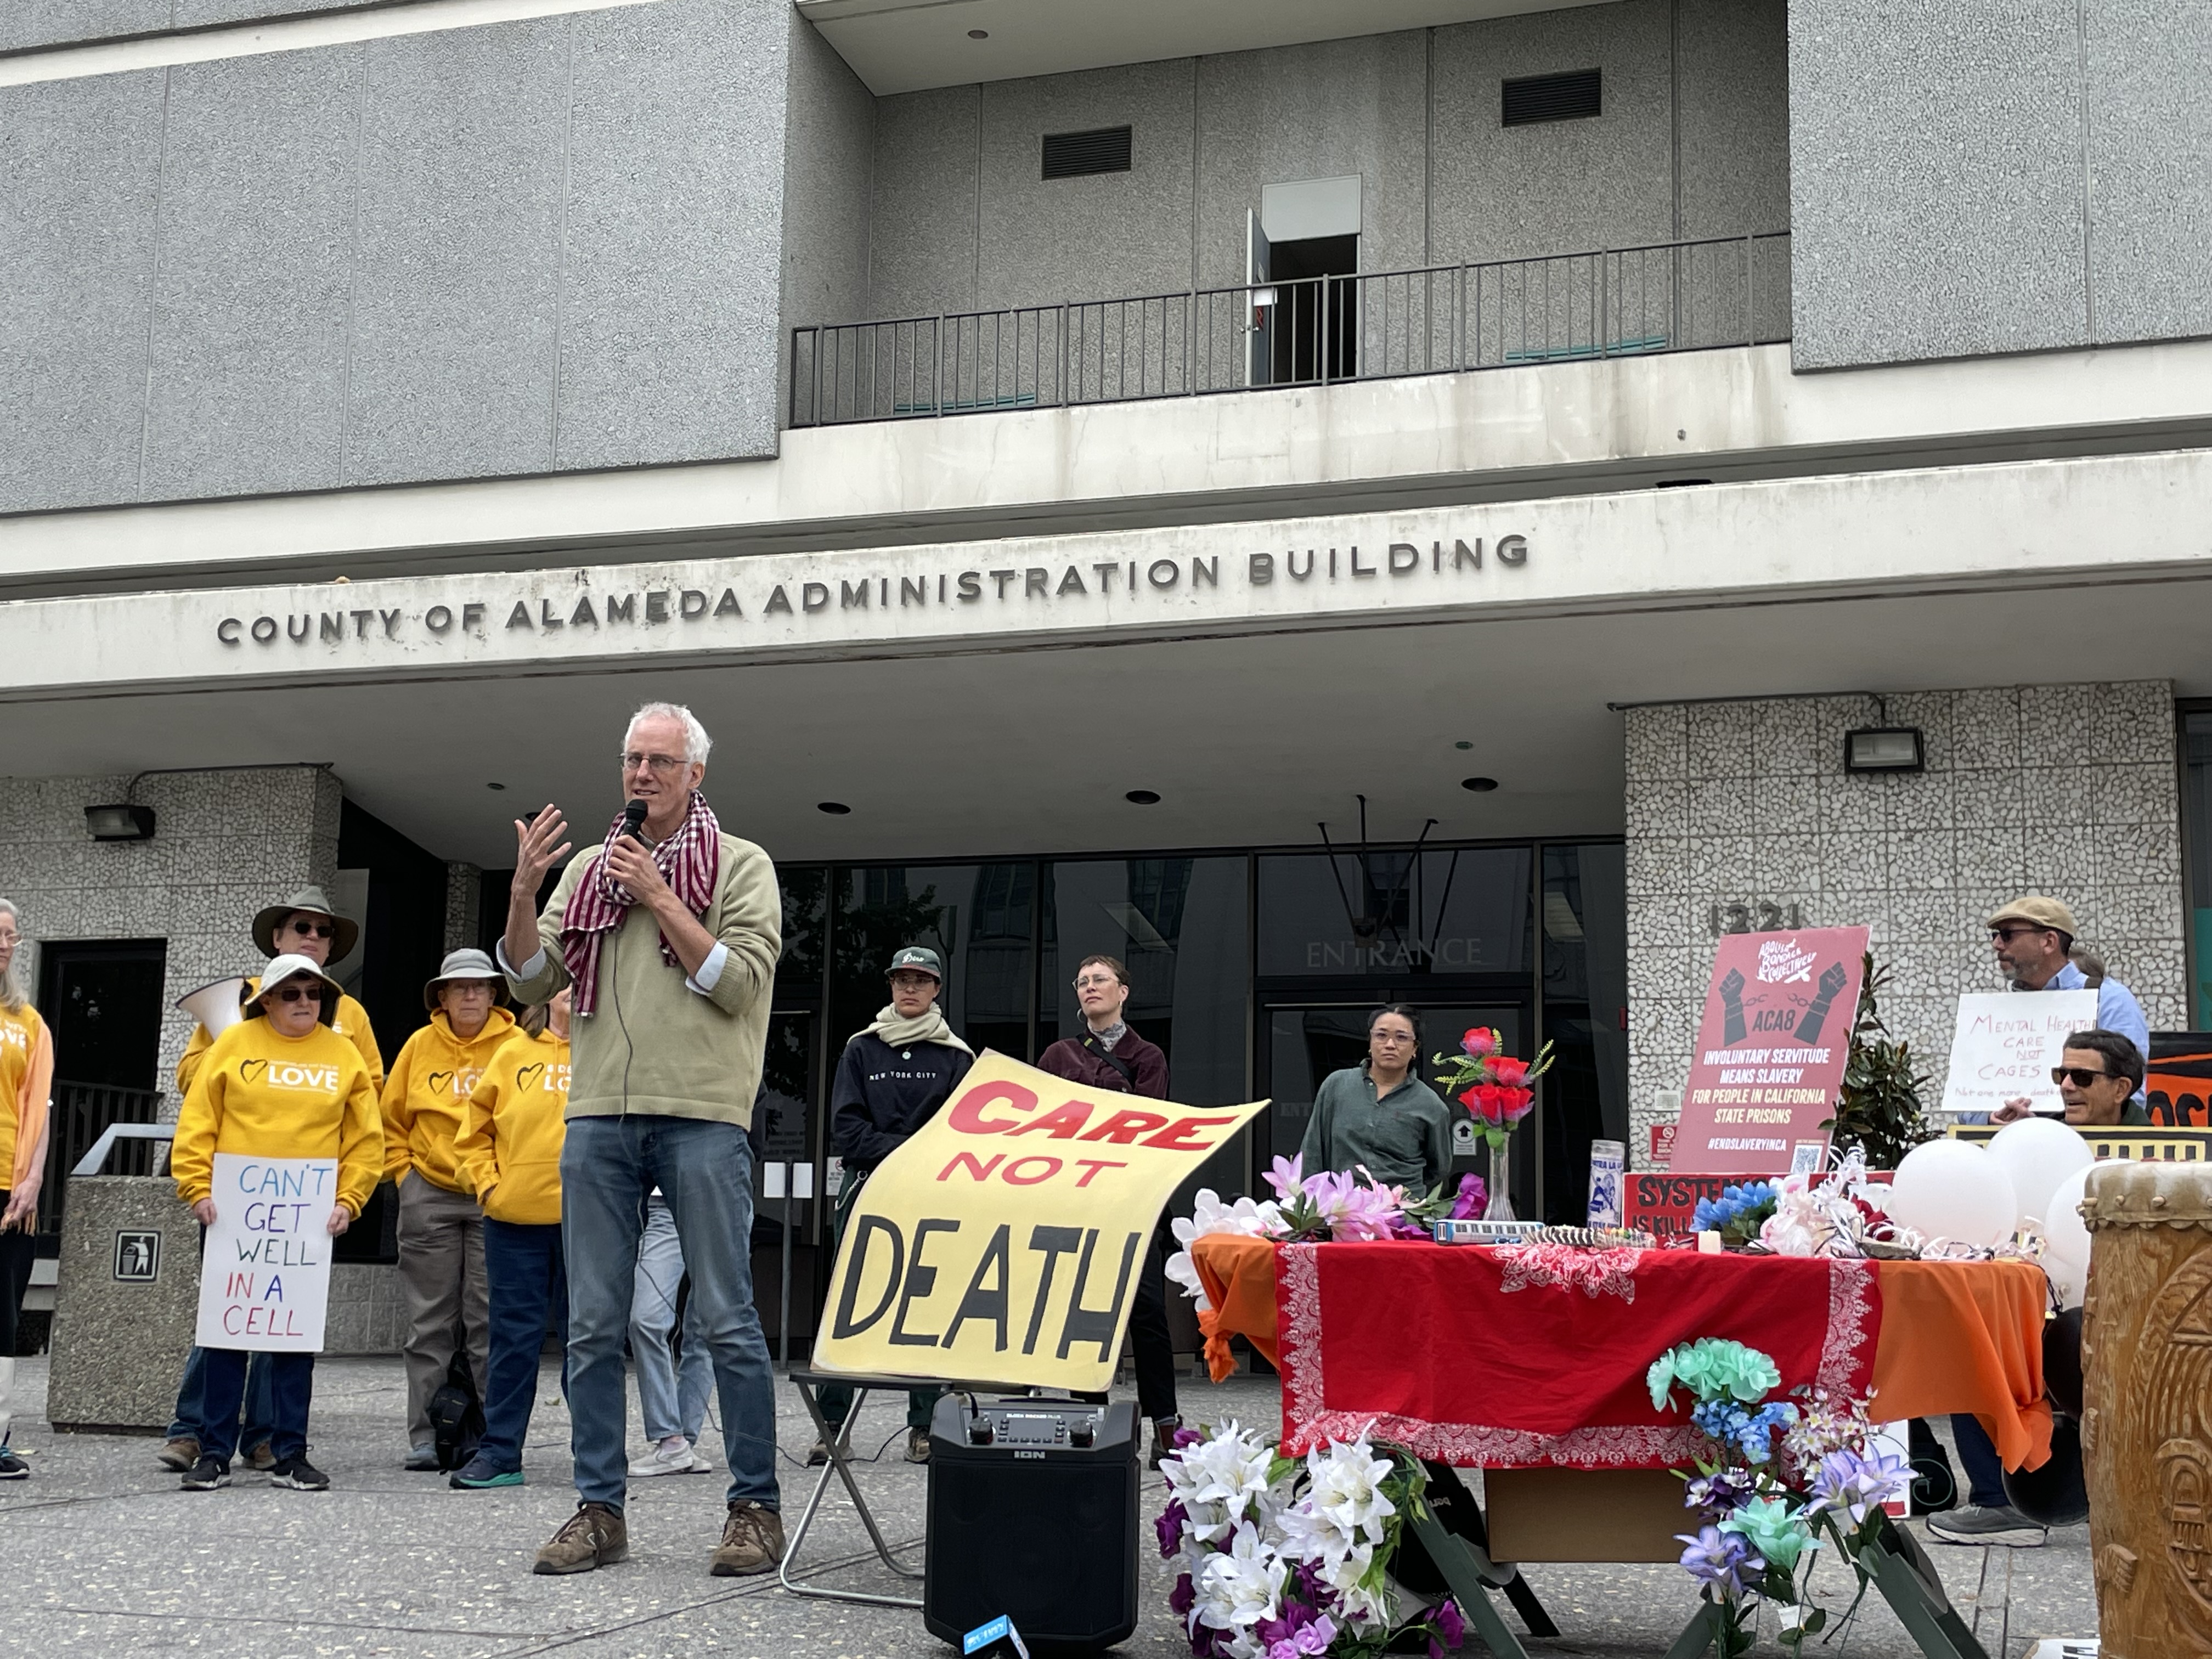 Photo of John Lindsay-Poland, California Healing Justice Program's Co-Director, addressing the crowd at the rally to call for halting Alameda County jail expansion, held in front of county building. He stands besides signs and an alter to those who've lost their lives at the jail.